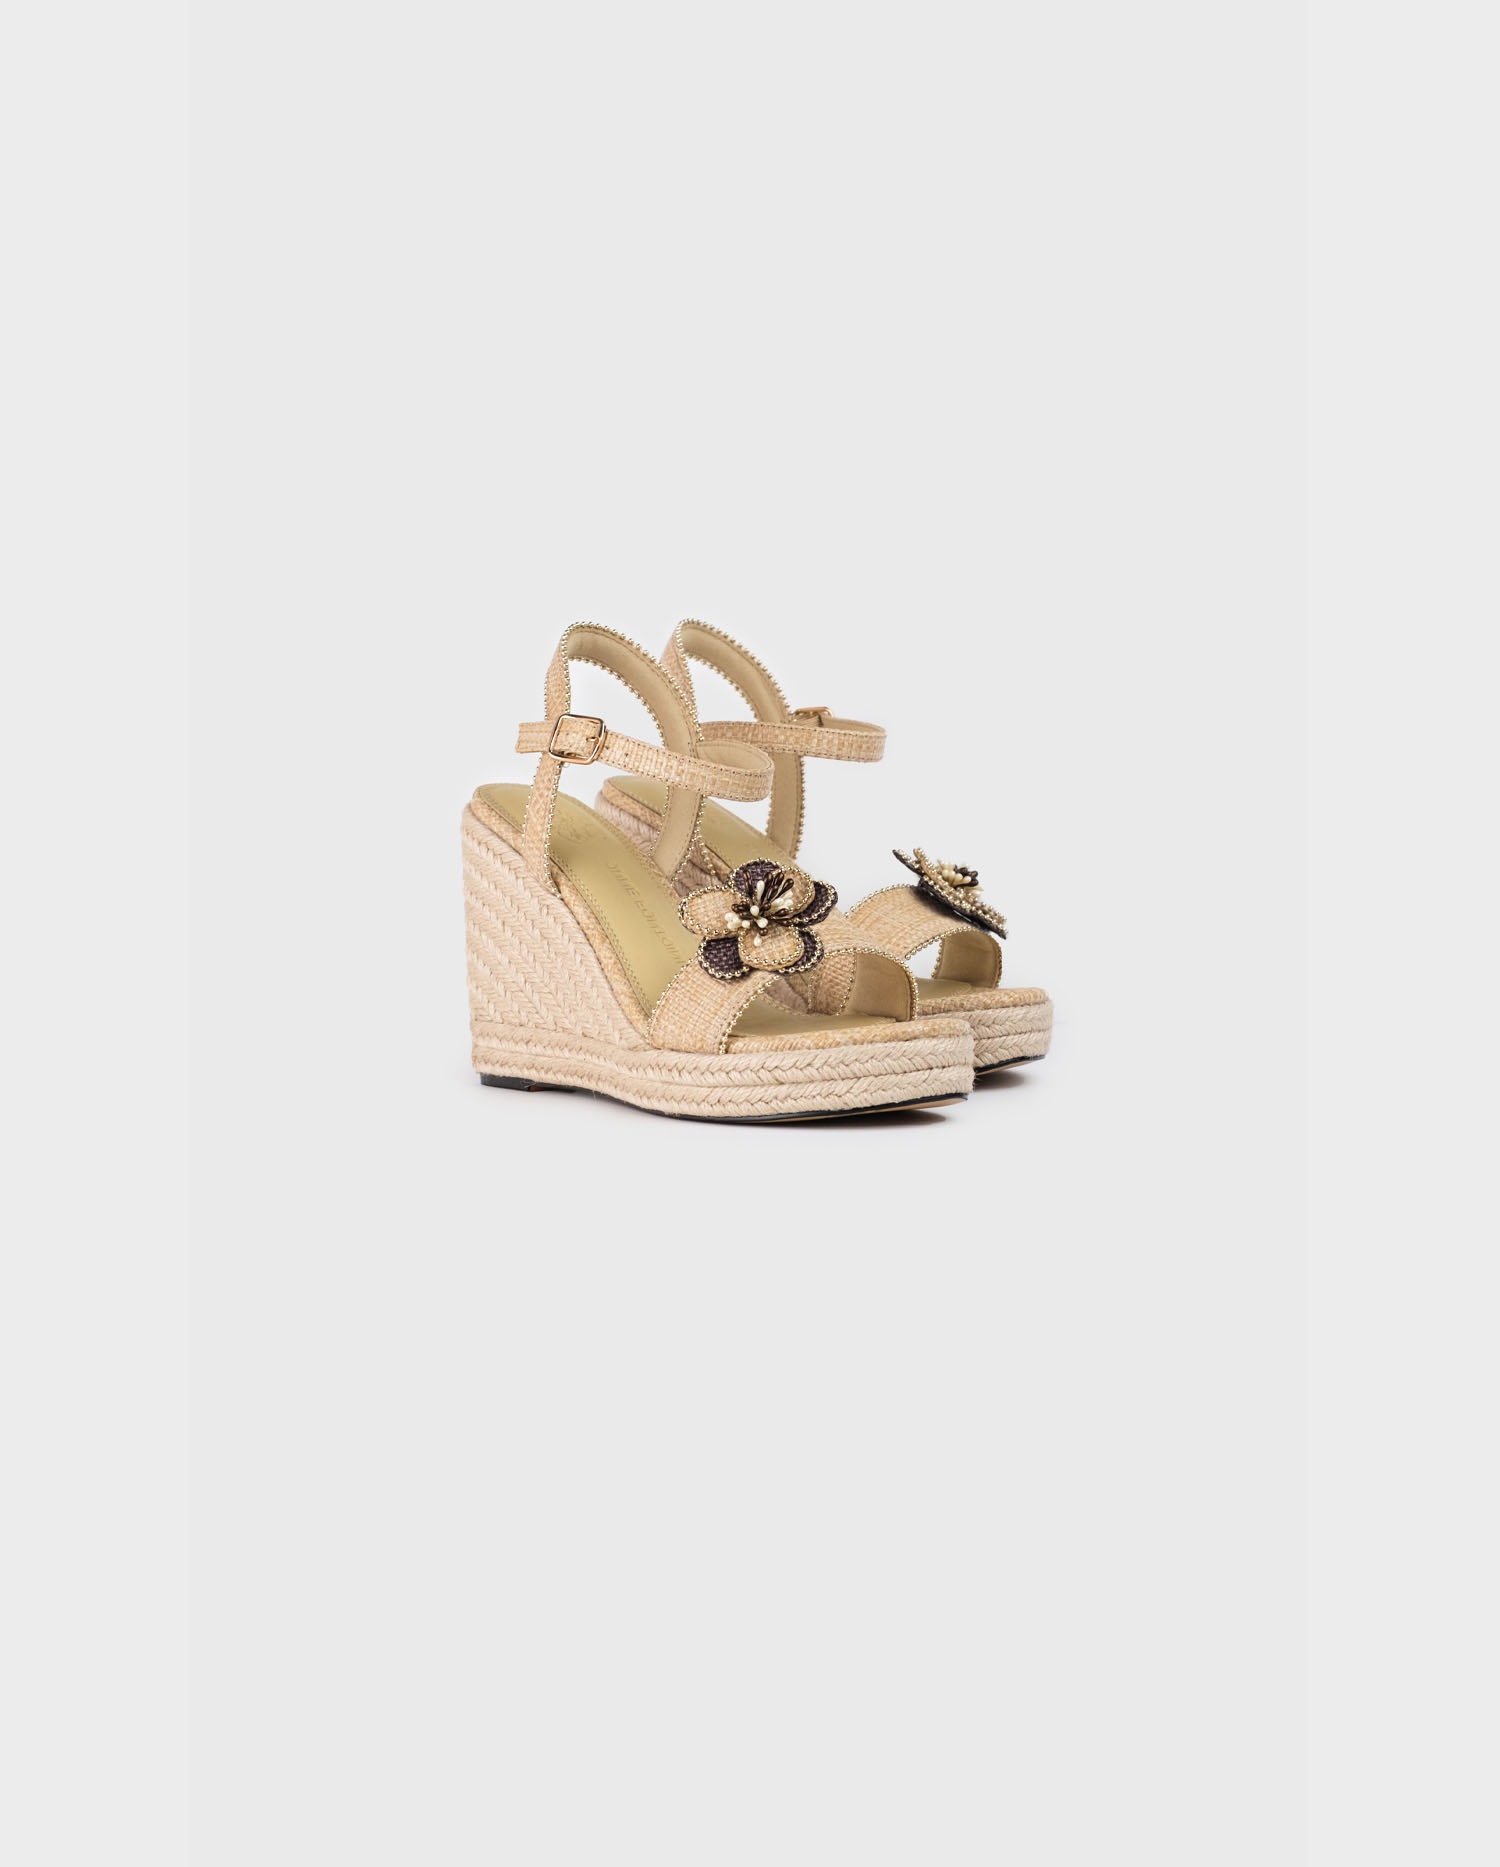 Discover the ONECA espadrille wedge sandals from ANNE FONTAINE